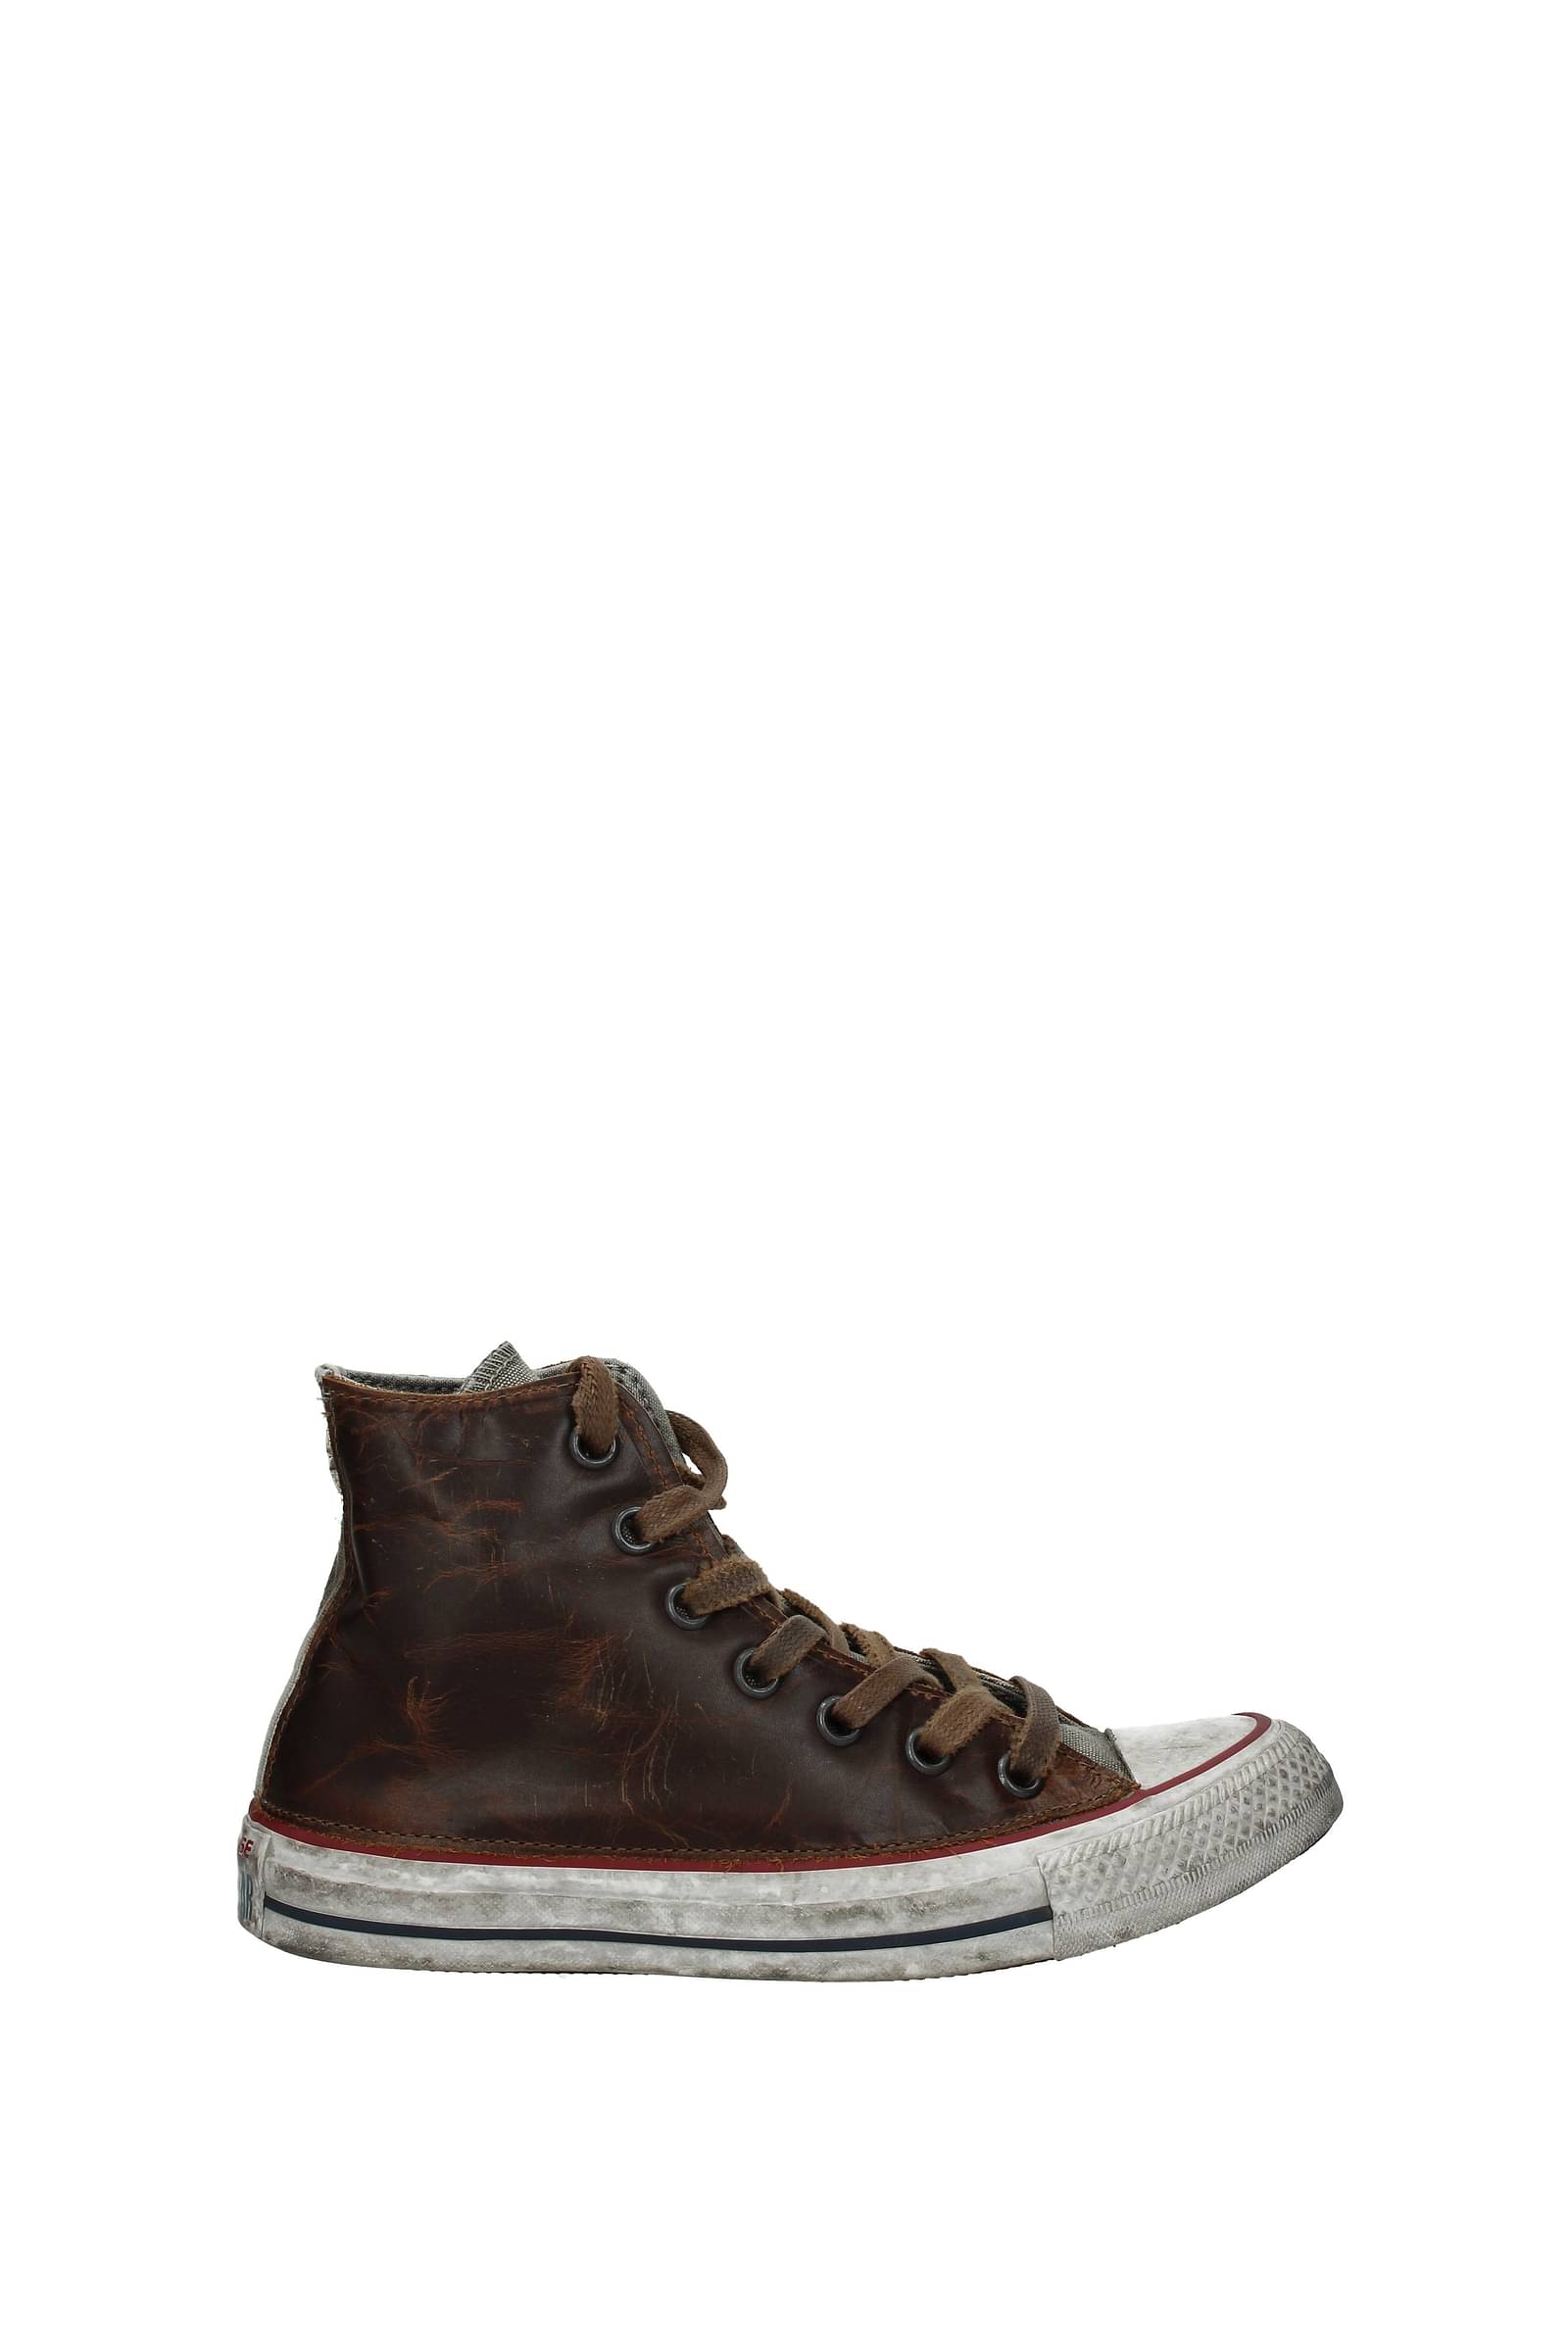 converse outlet online italia